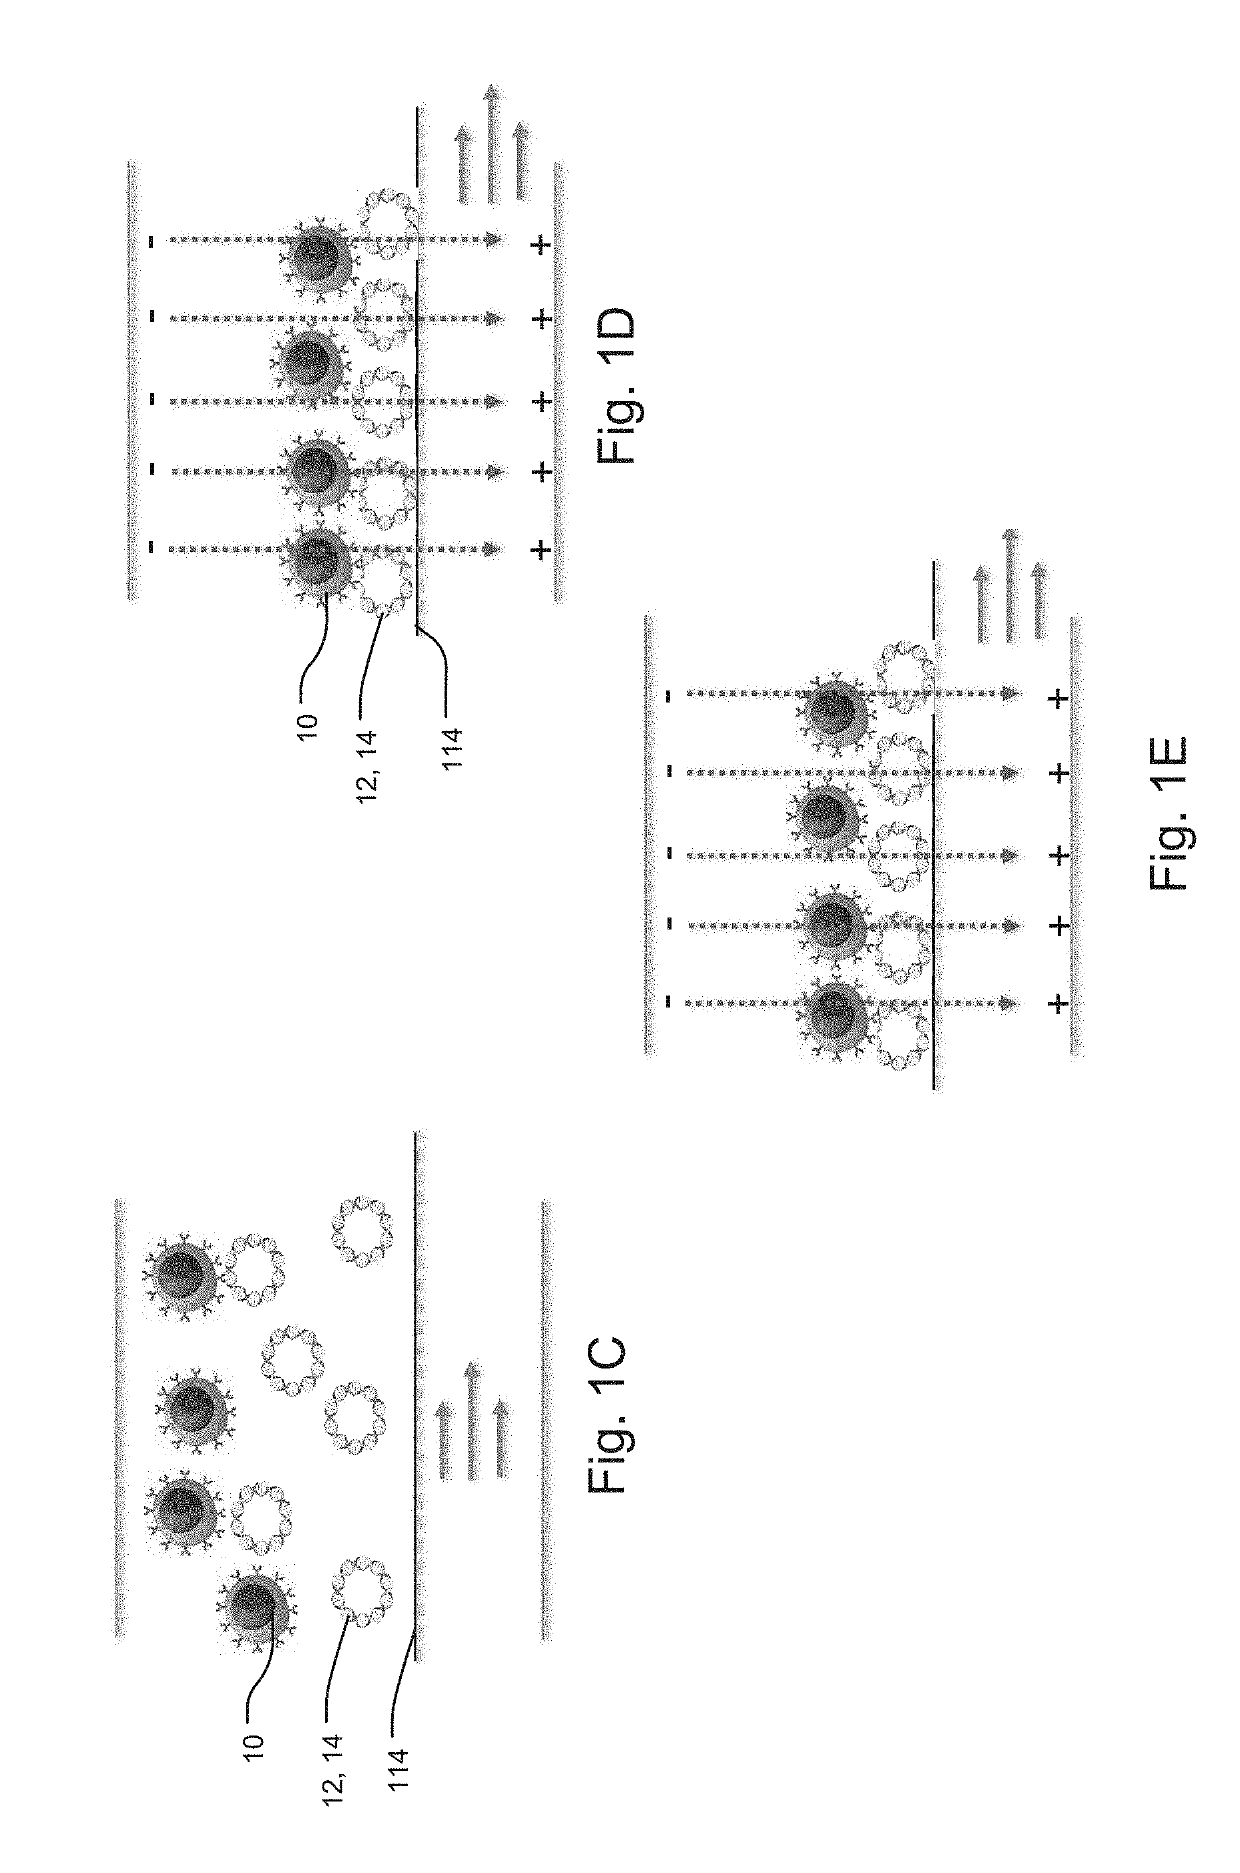 Dual-Purpose Viral Transduction and Electroporation Device